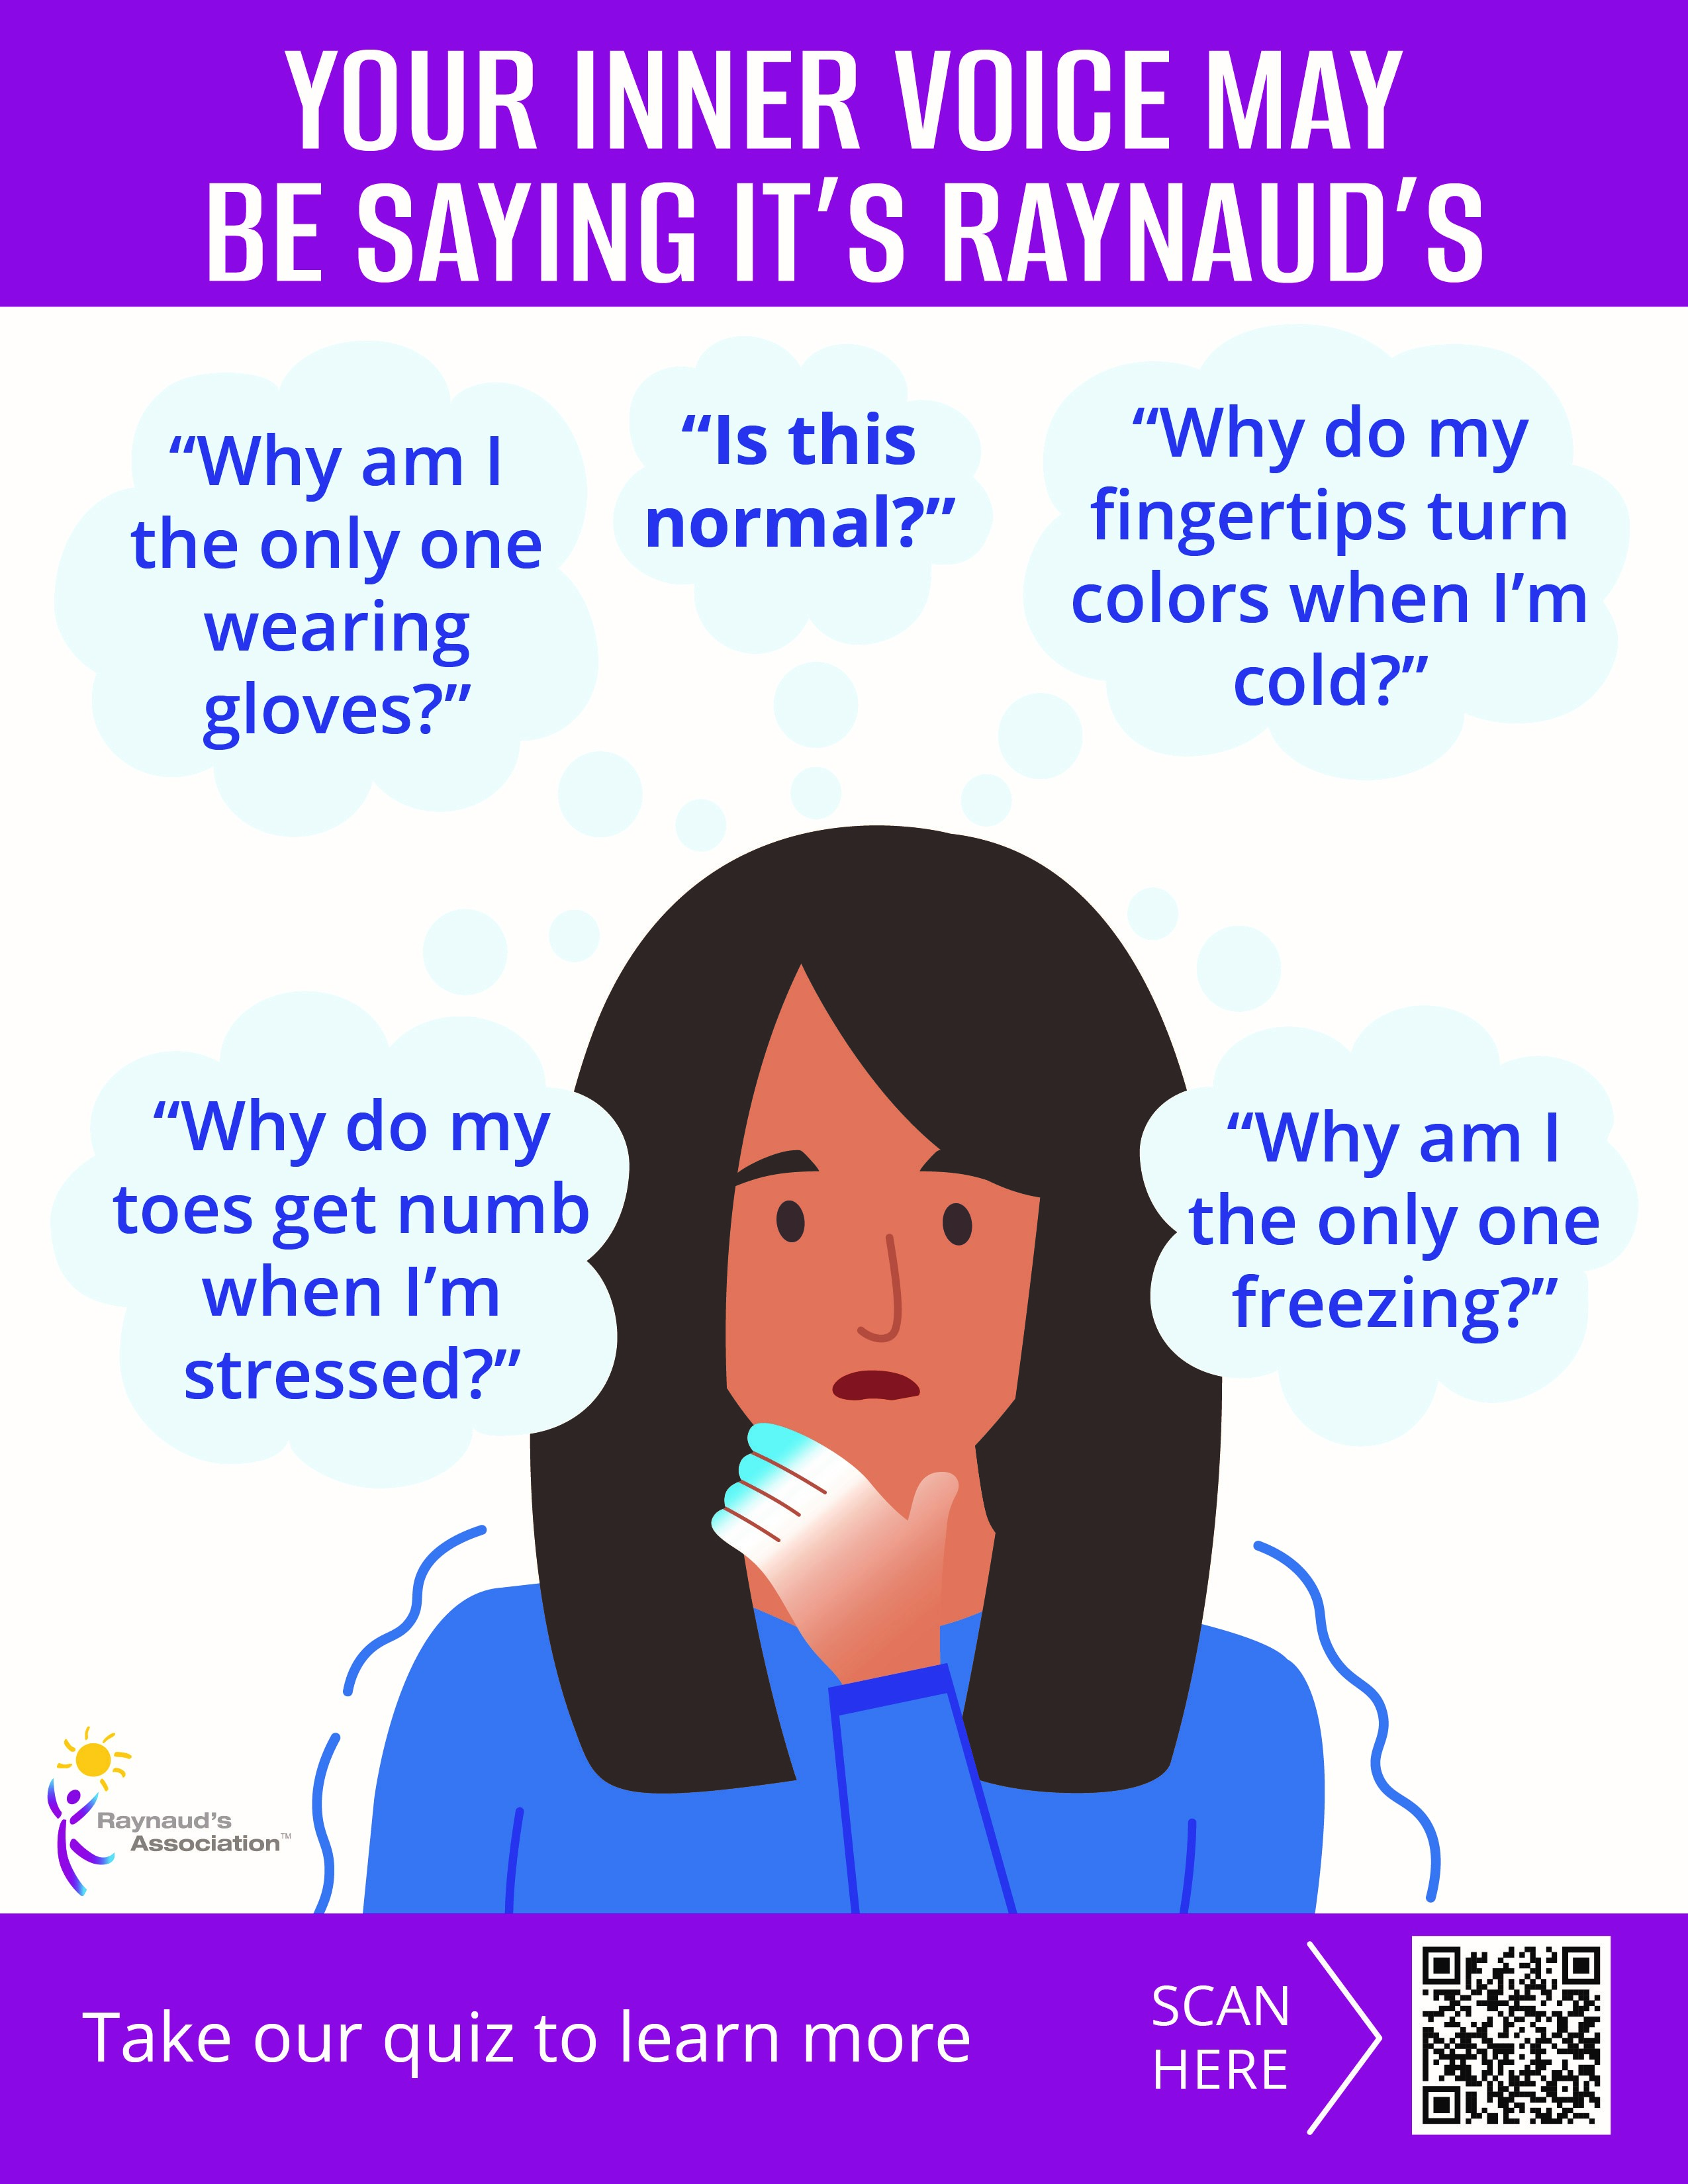 OCTOBER IS RAYNAUD'S AWARENESS MONTH